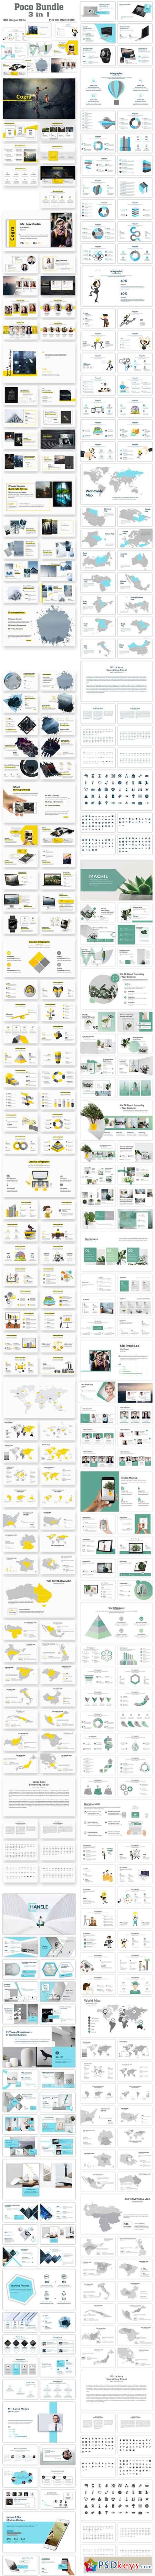 Poco Bundle 3 in 1 PowerPoint Template 22605805